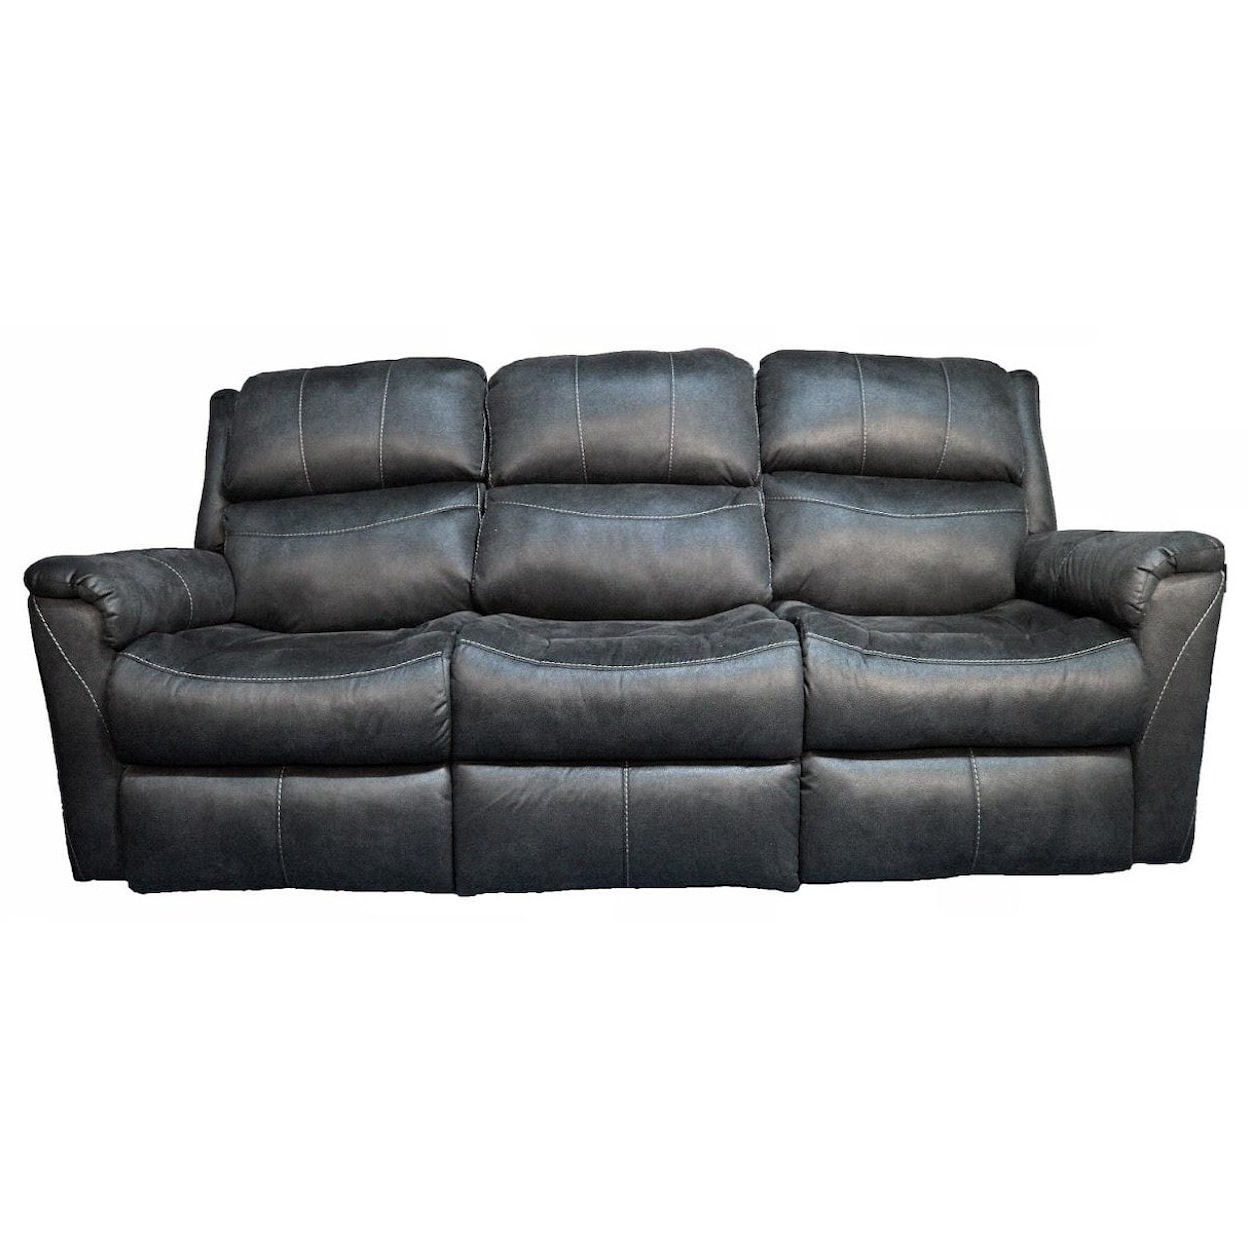 Southern Motion Shimmer Double Reclining Sofa